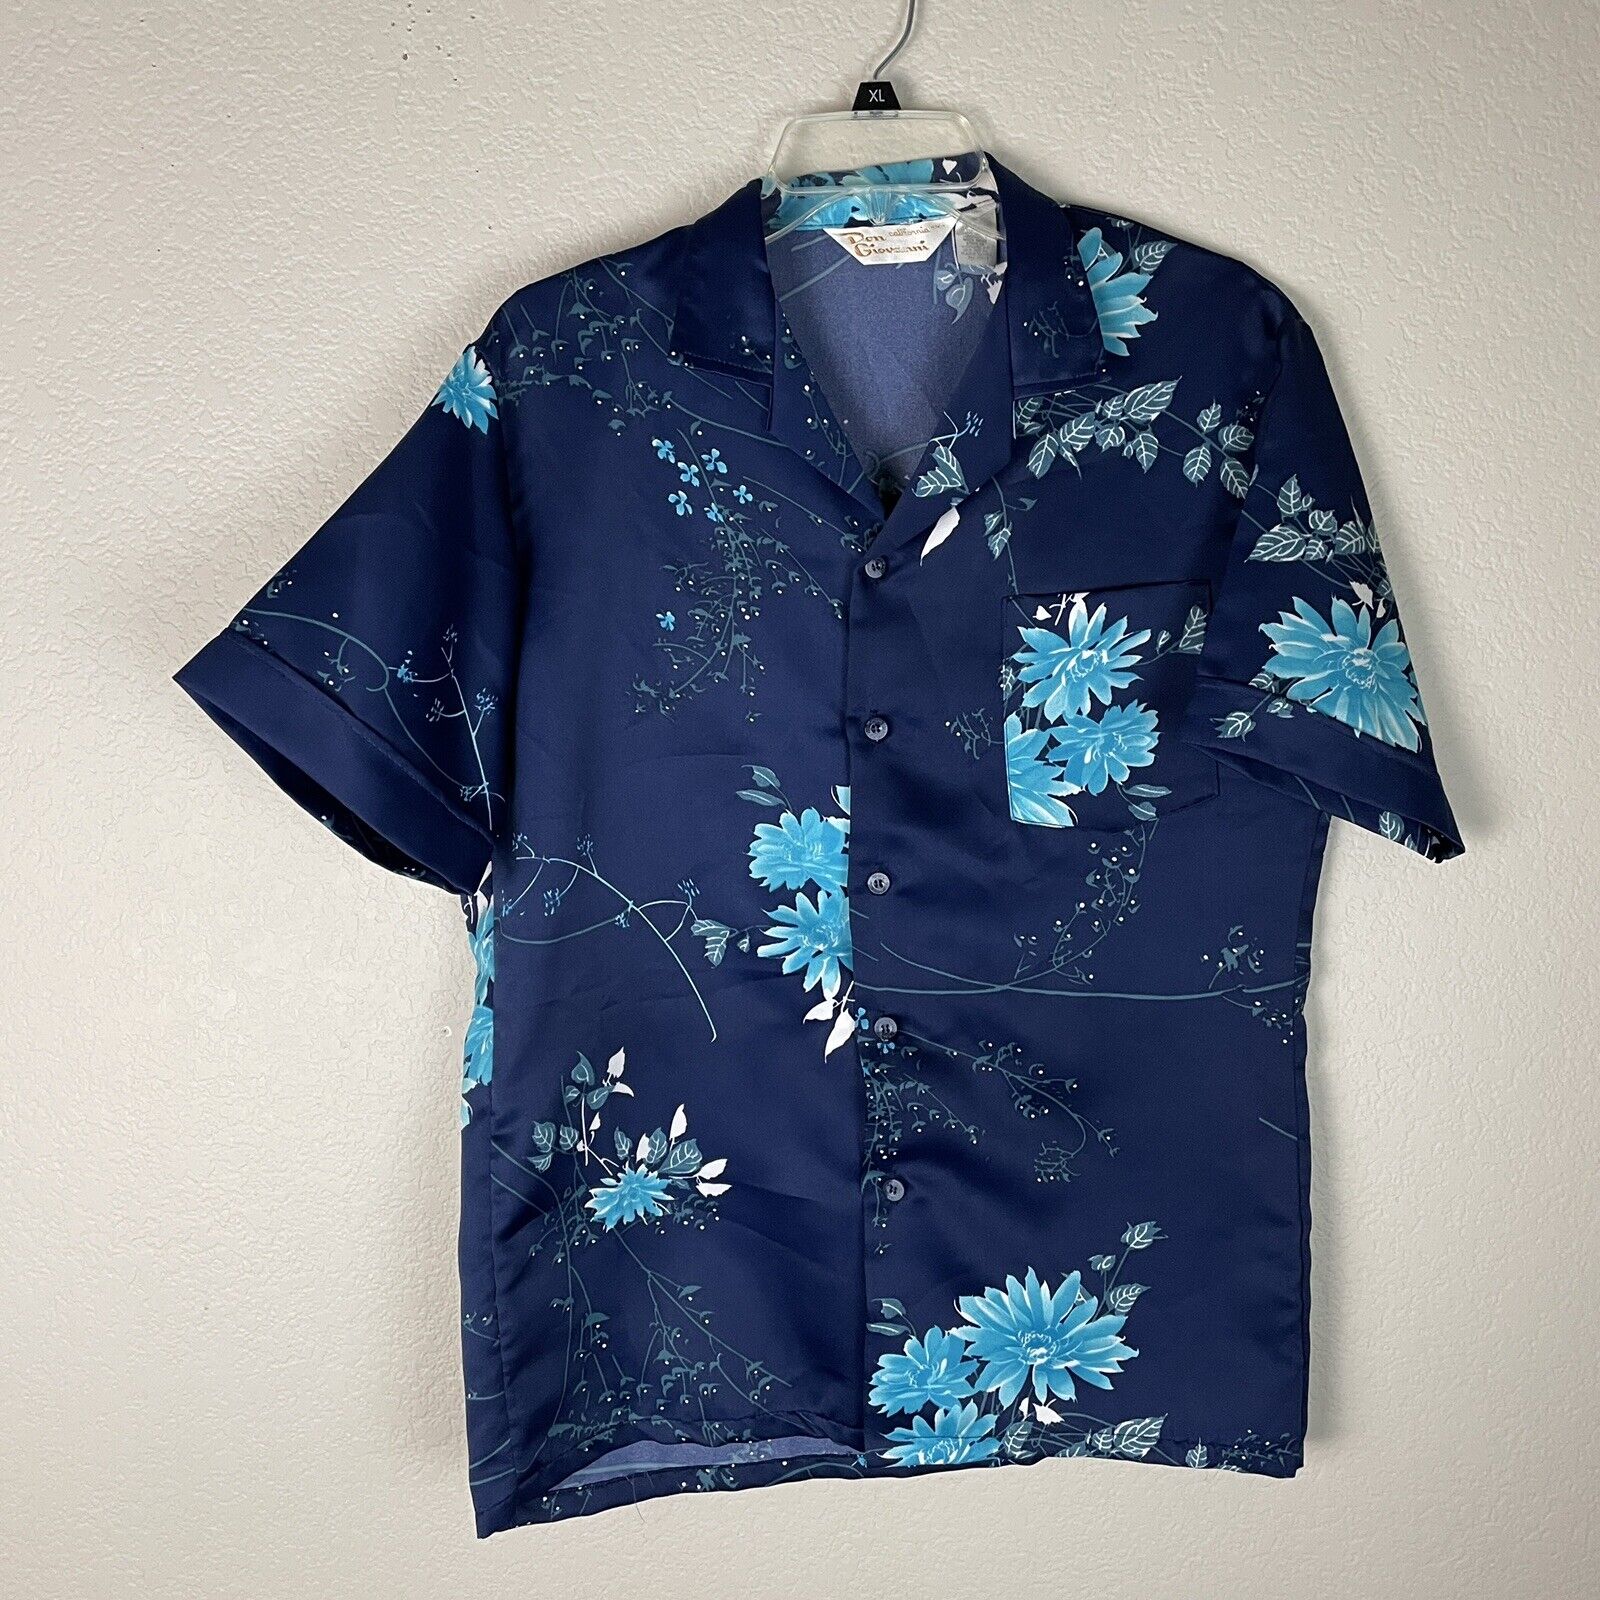 Don Giovanni Floral Button Up Shirt Vintage